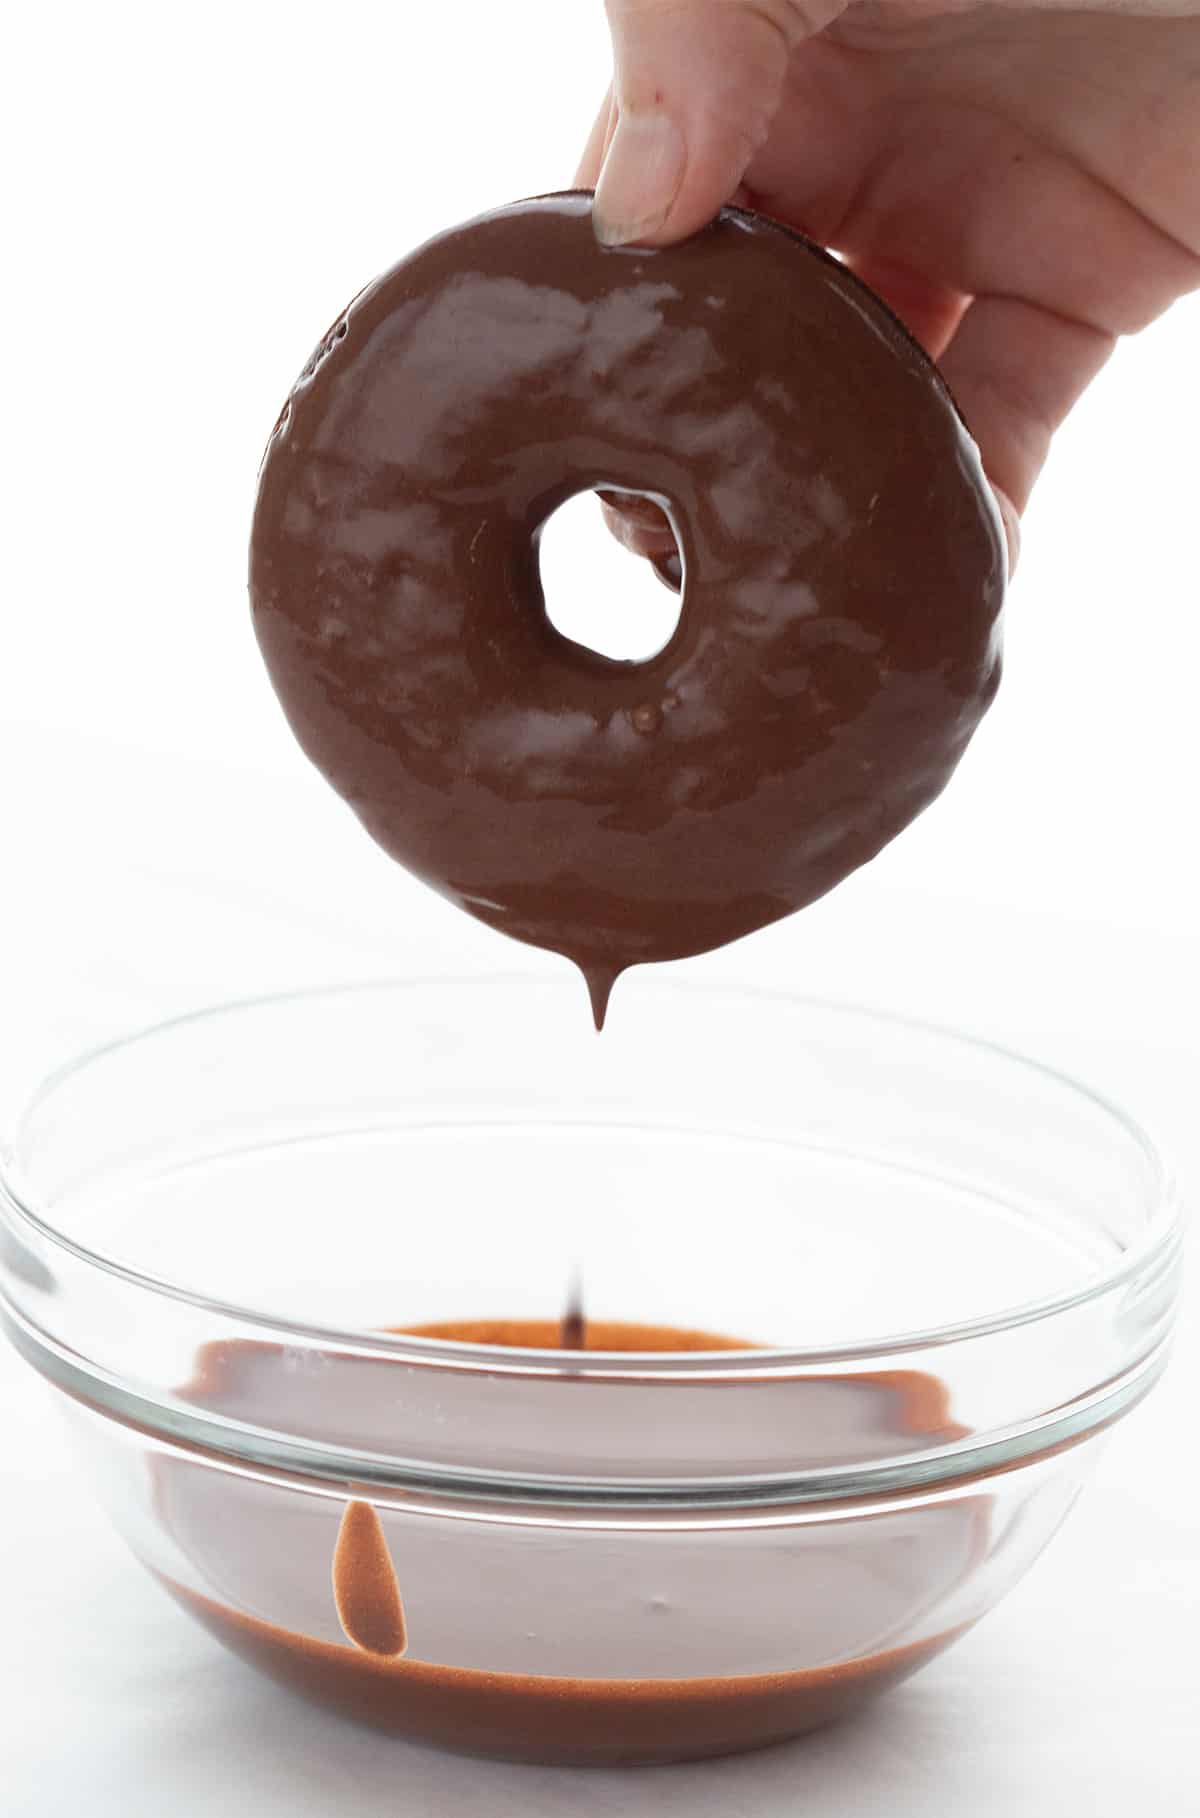 A hand holding a keto chocolate donut that has just been dipped in chocolate glaze. 